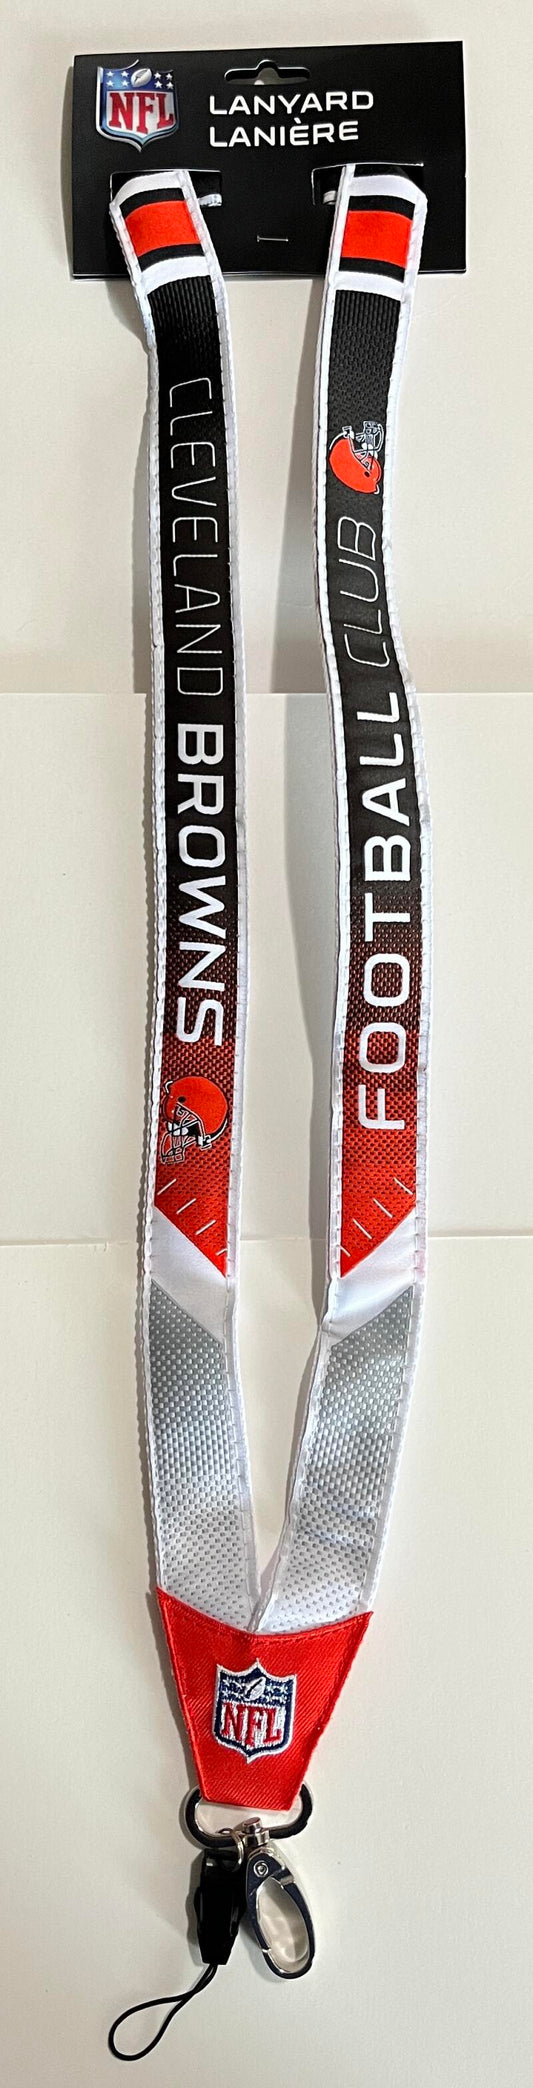 Cleveland Browns Woven Licensed NFL Football Lanyard Metal Clasp Image 1